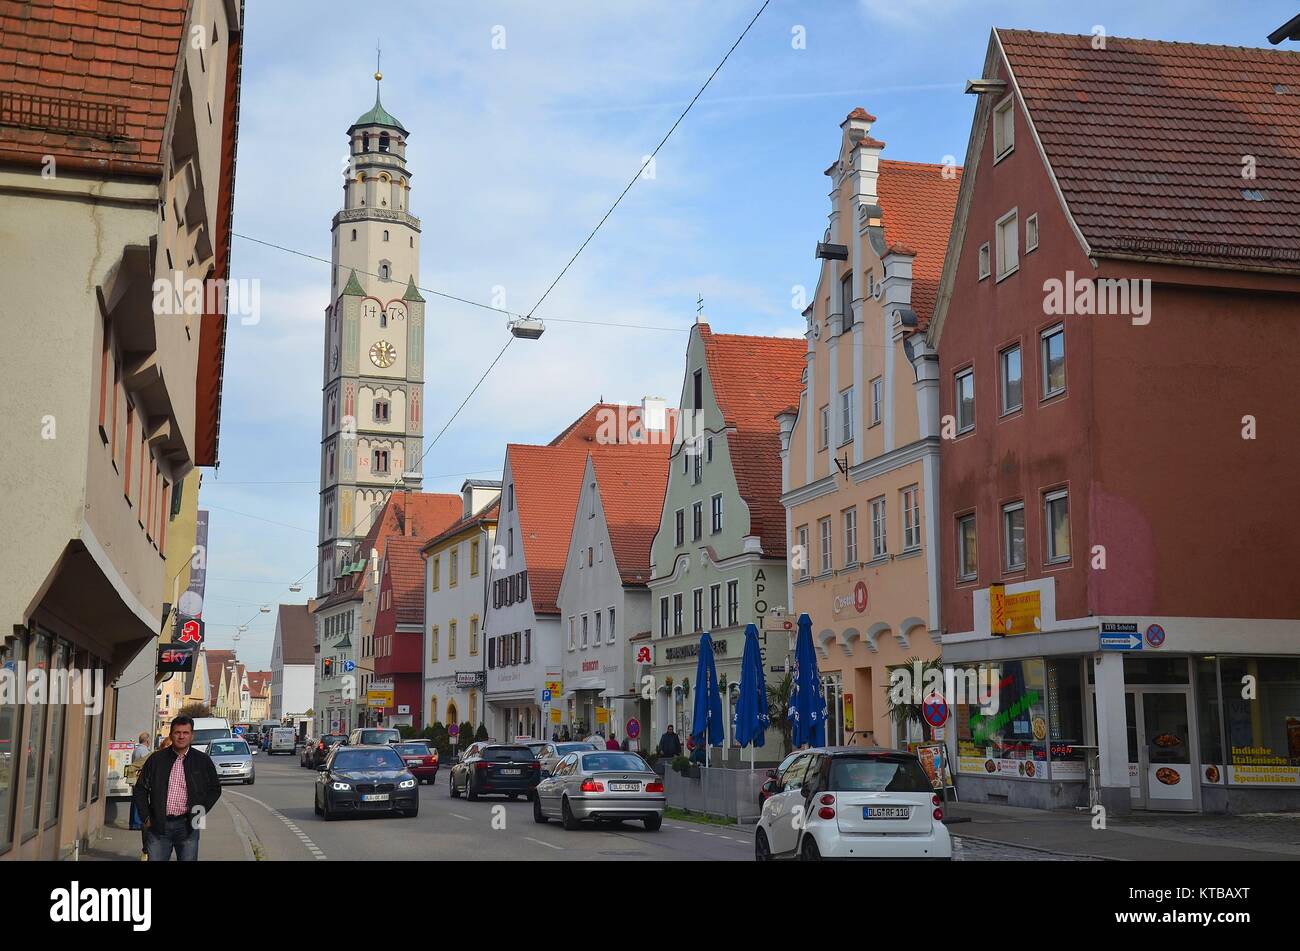 The medieval town of Lauingen (Bavaria, Germany) Stock Photo